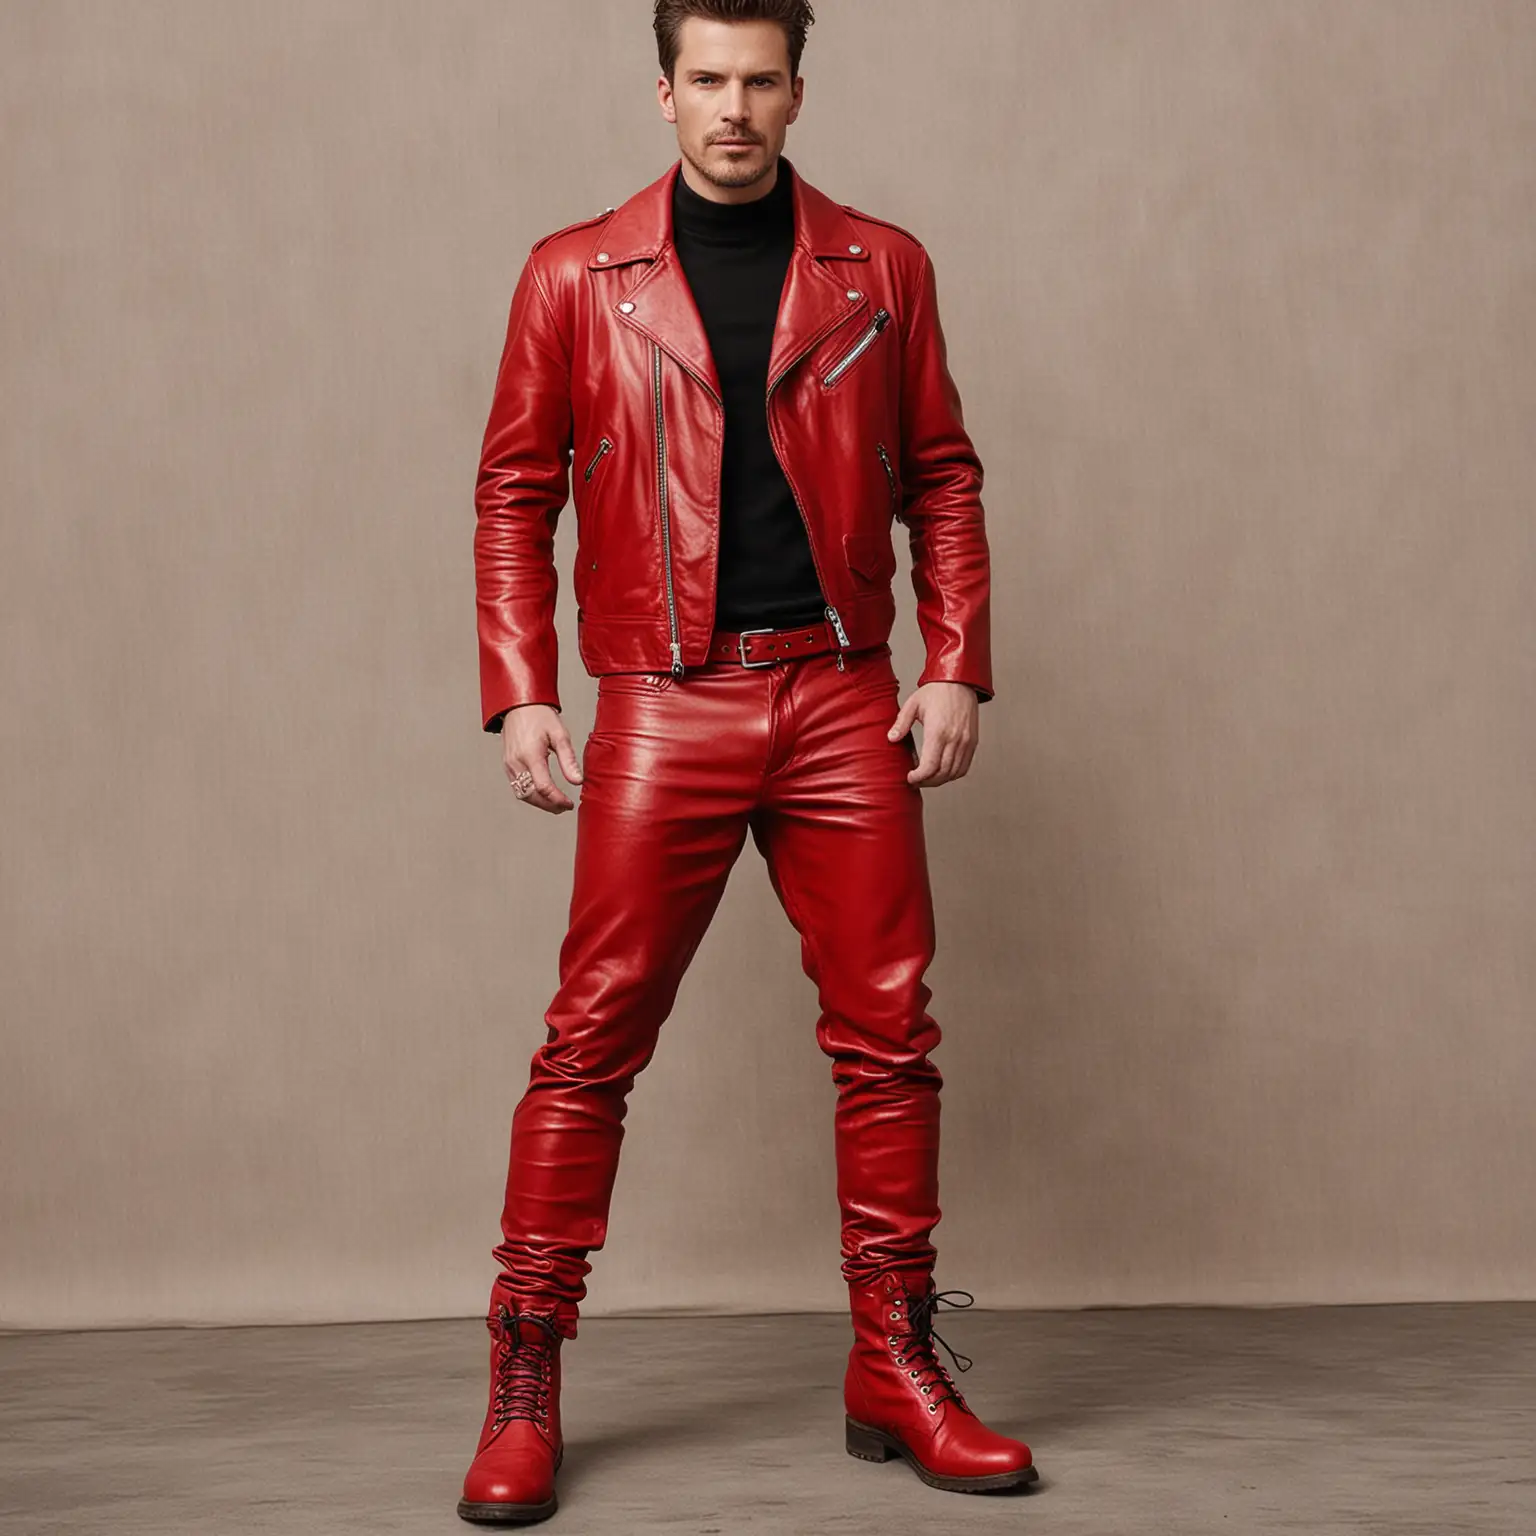 Stylish Man in Red Leather Ensemble